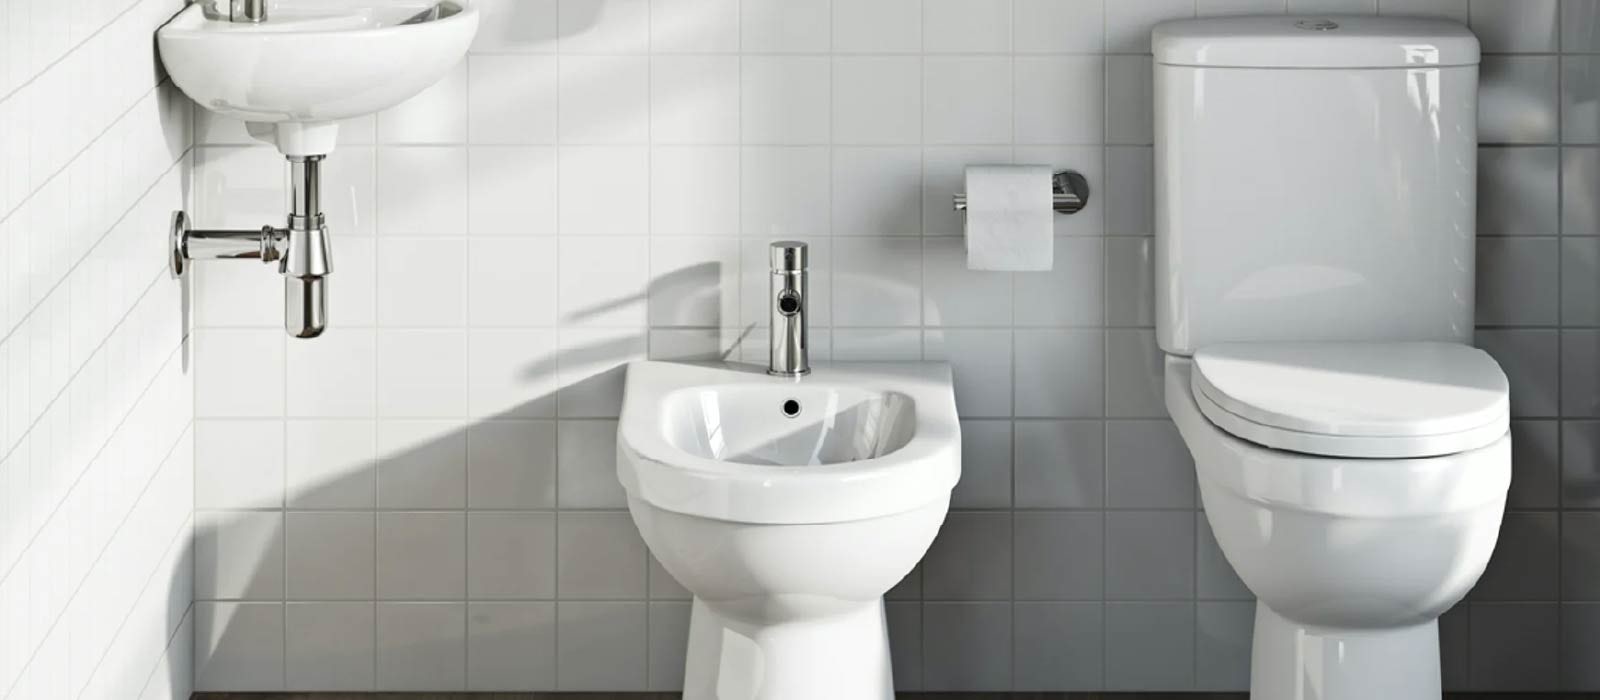 Bidet vs. Toilet – What's The Difference?